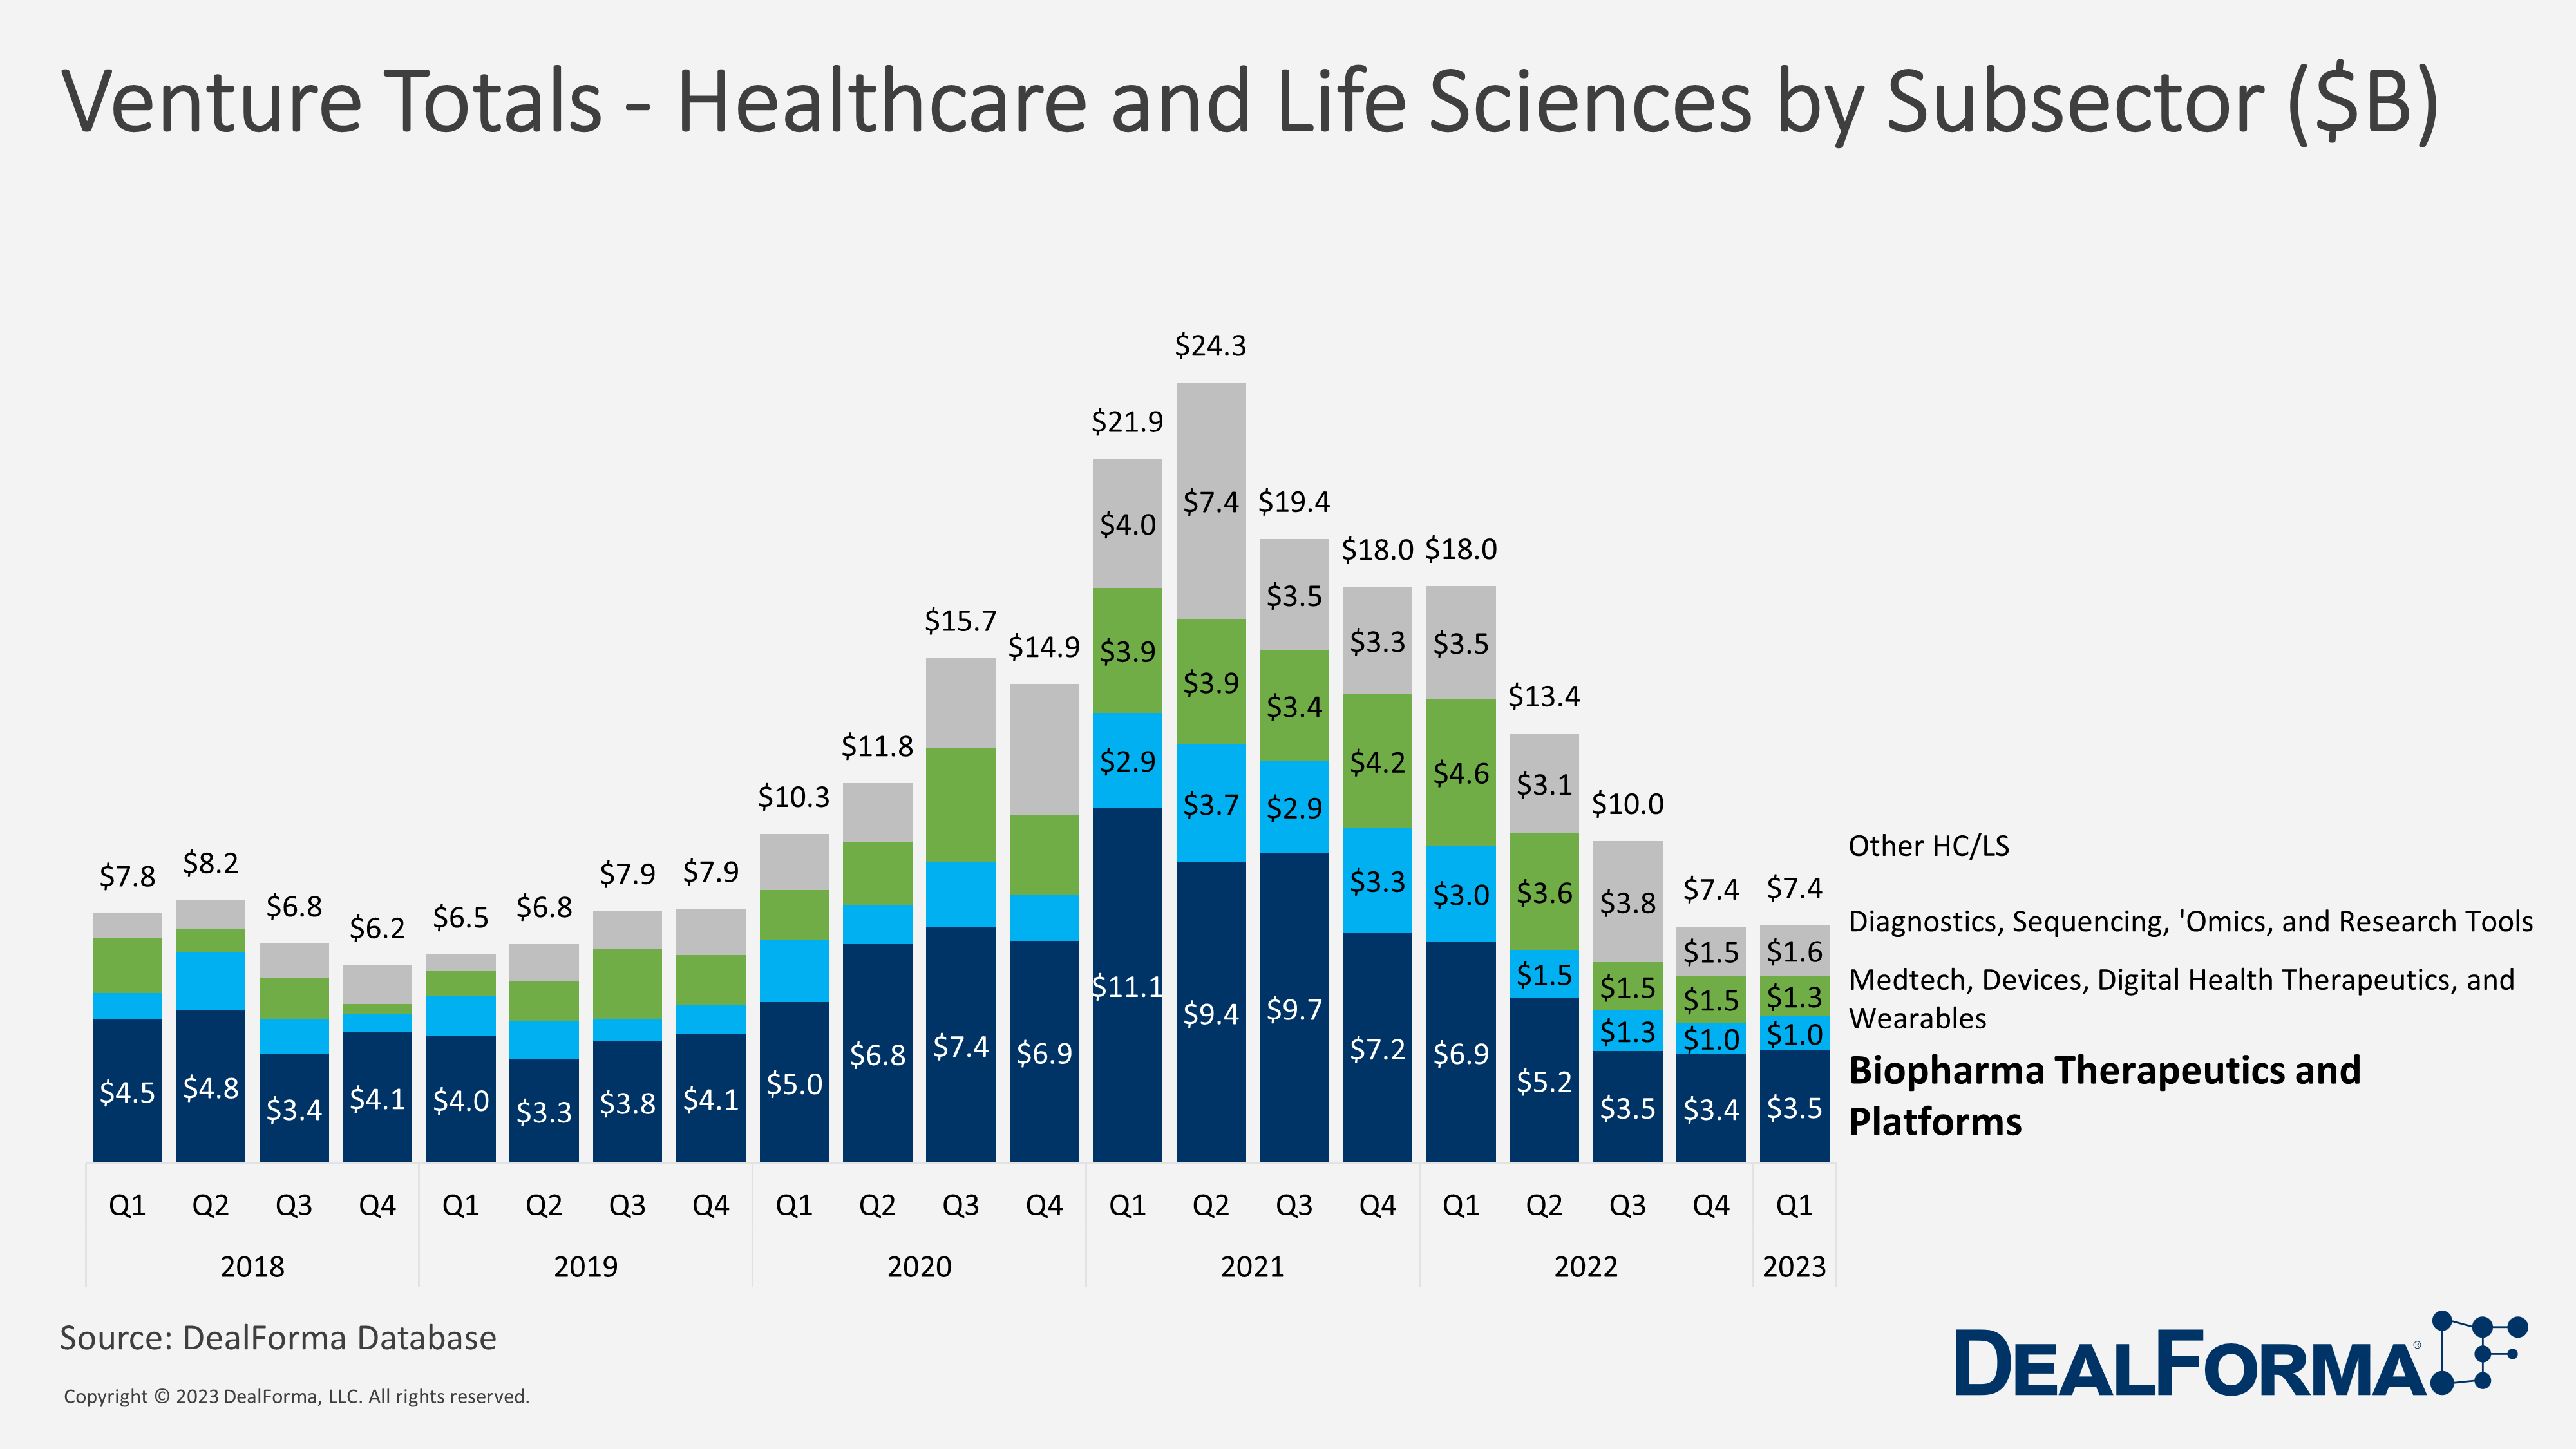 Venture Totals - Healthcare and Life Sciences by Subsector $B